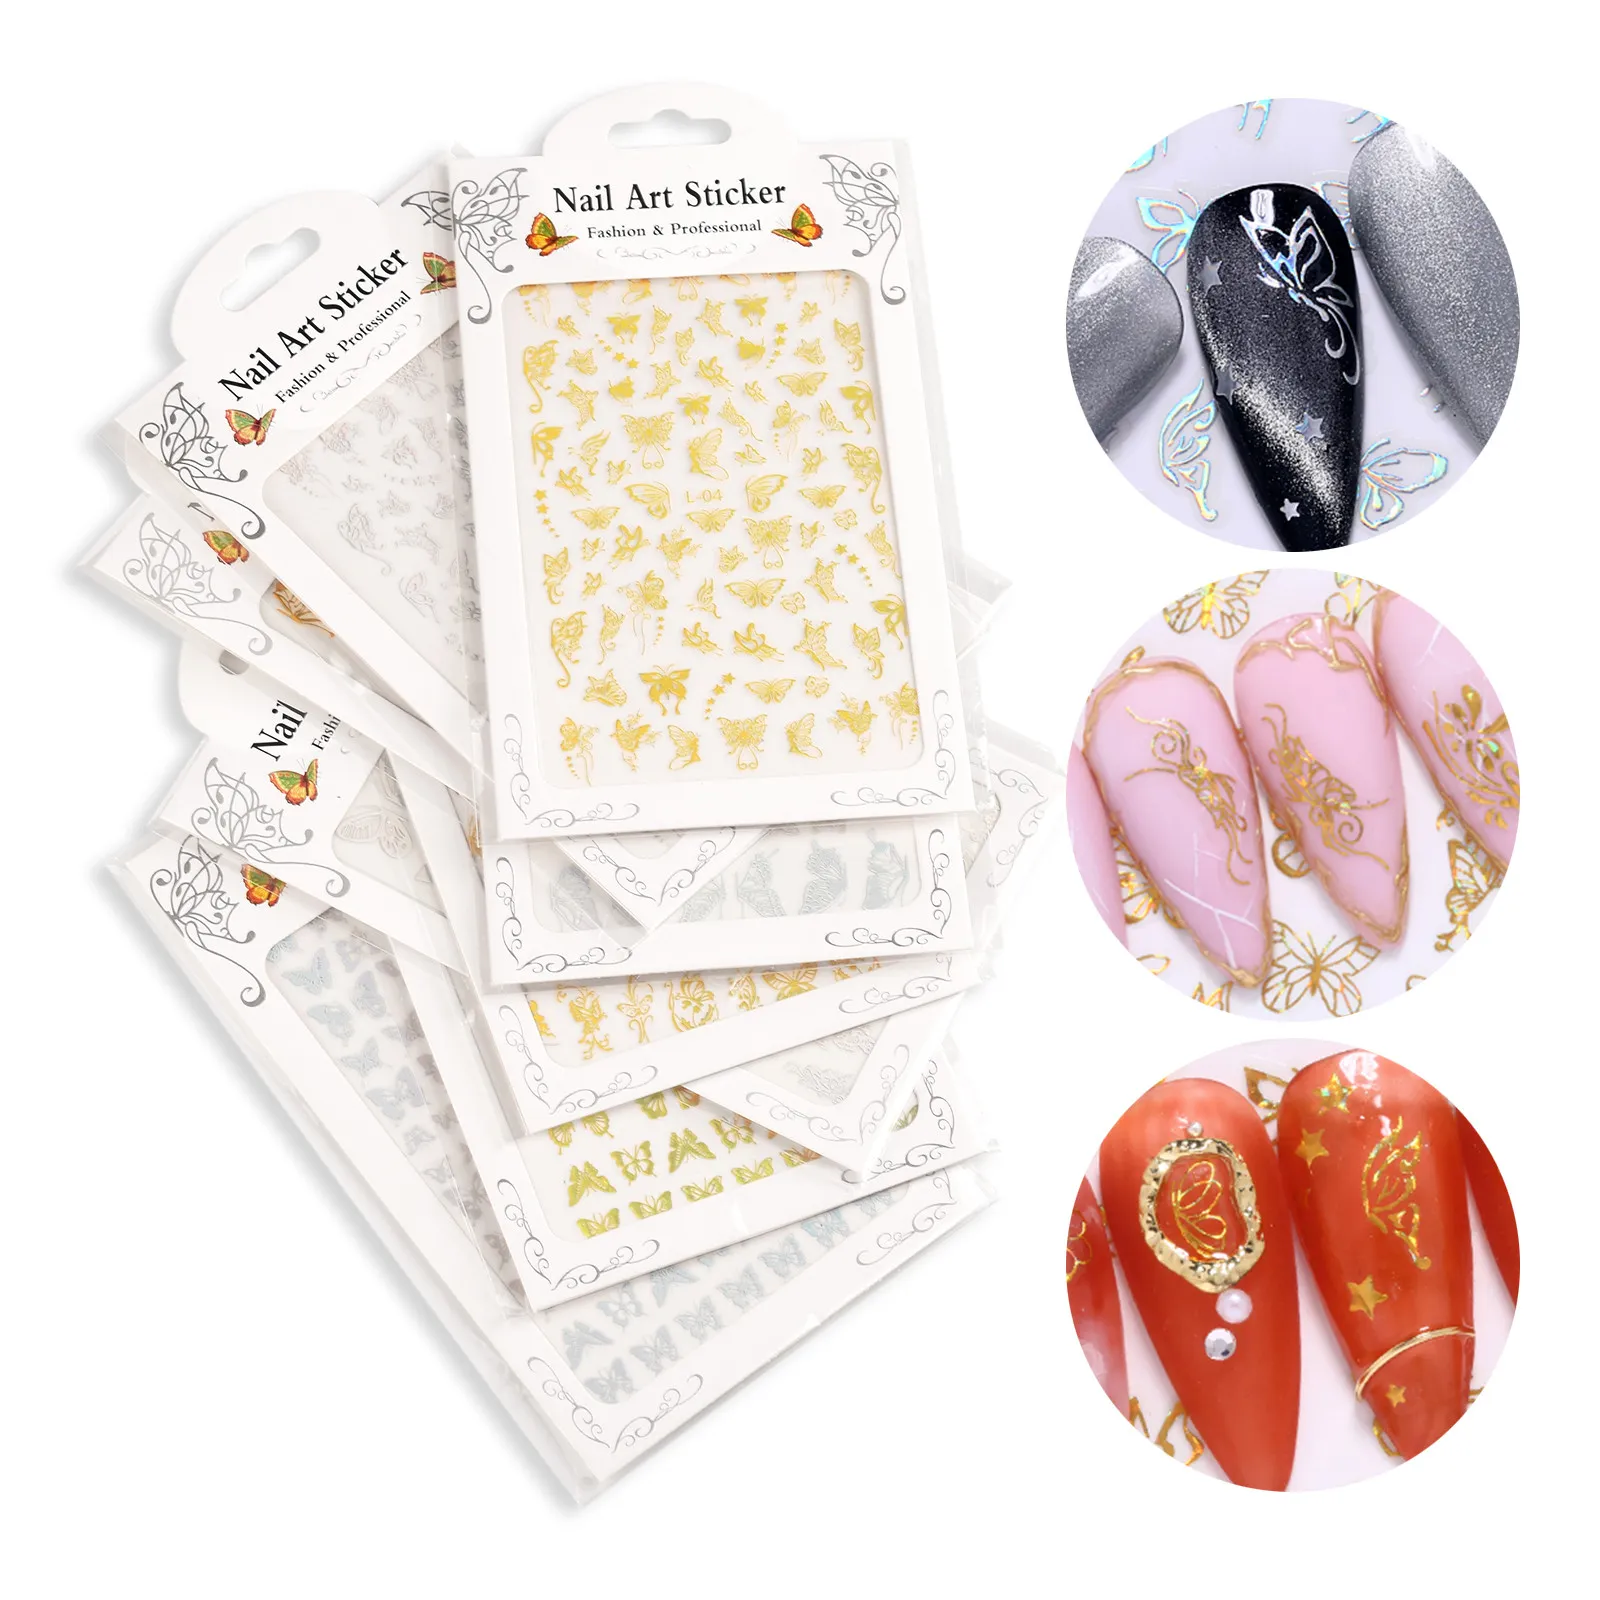 Gold and Silver Nail Art Butterfly Stickers Premium Good-looking 8pcs